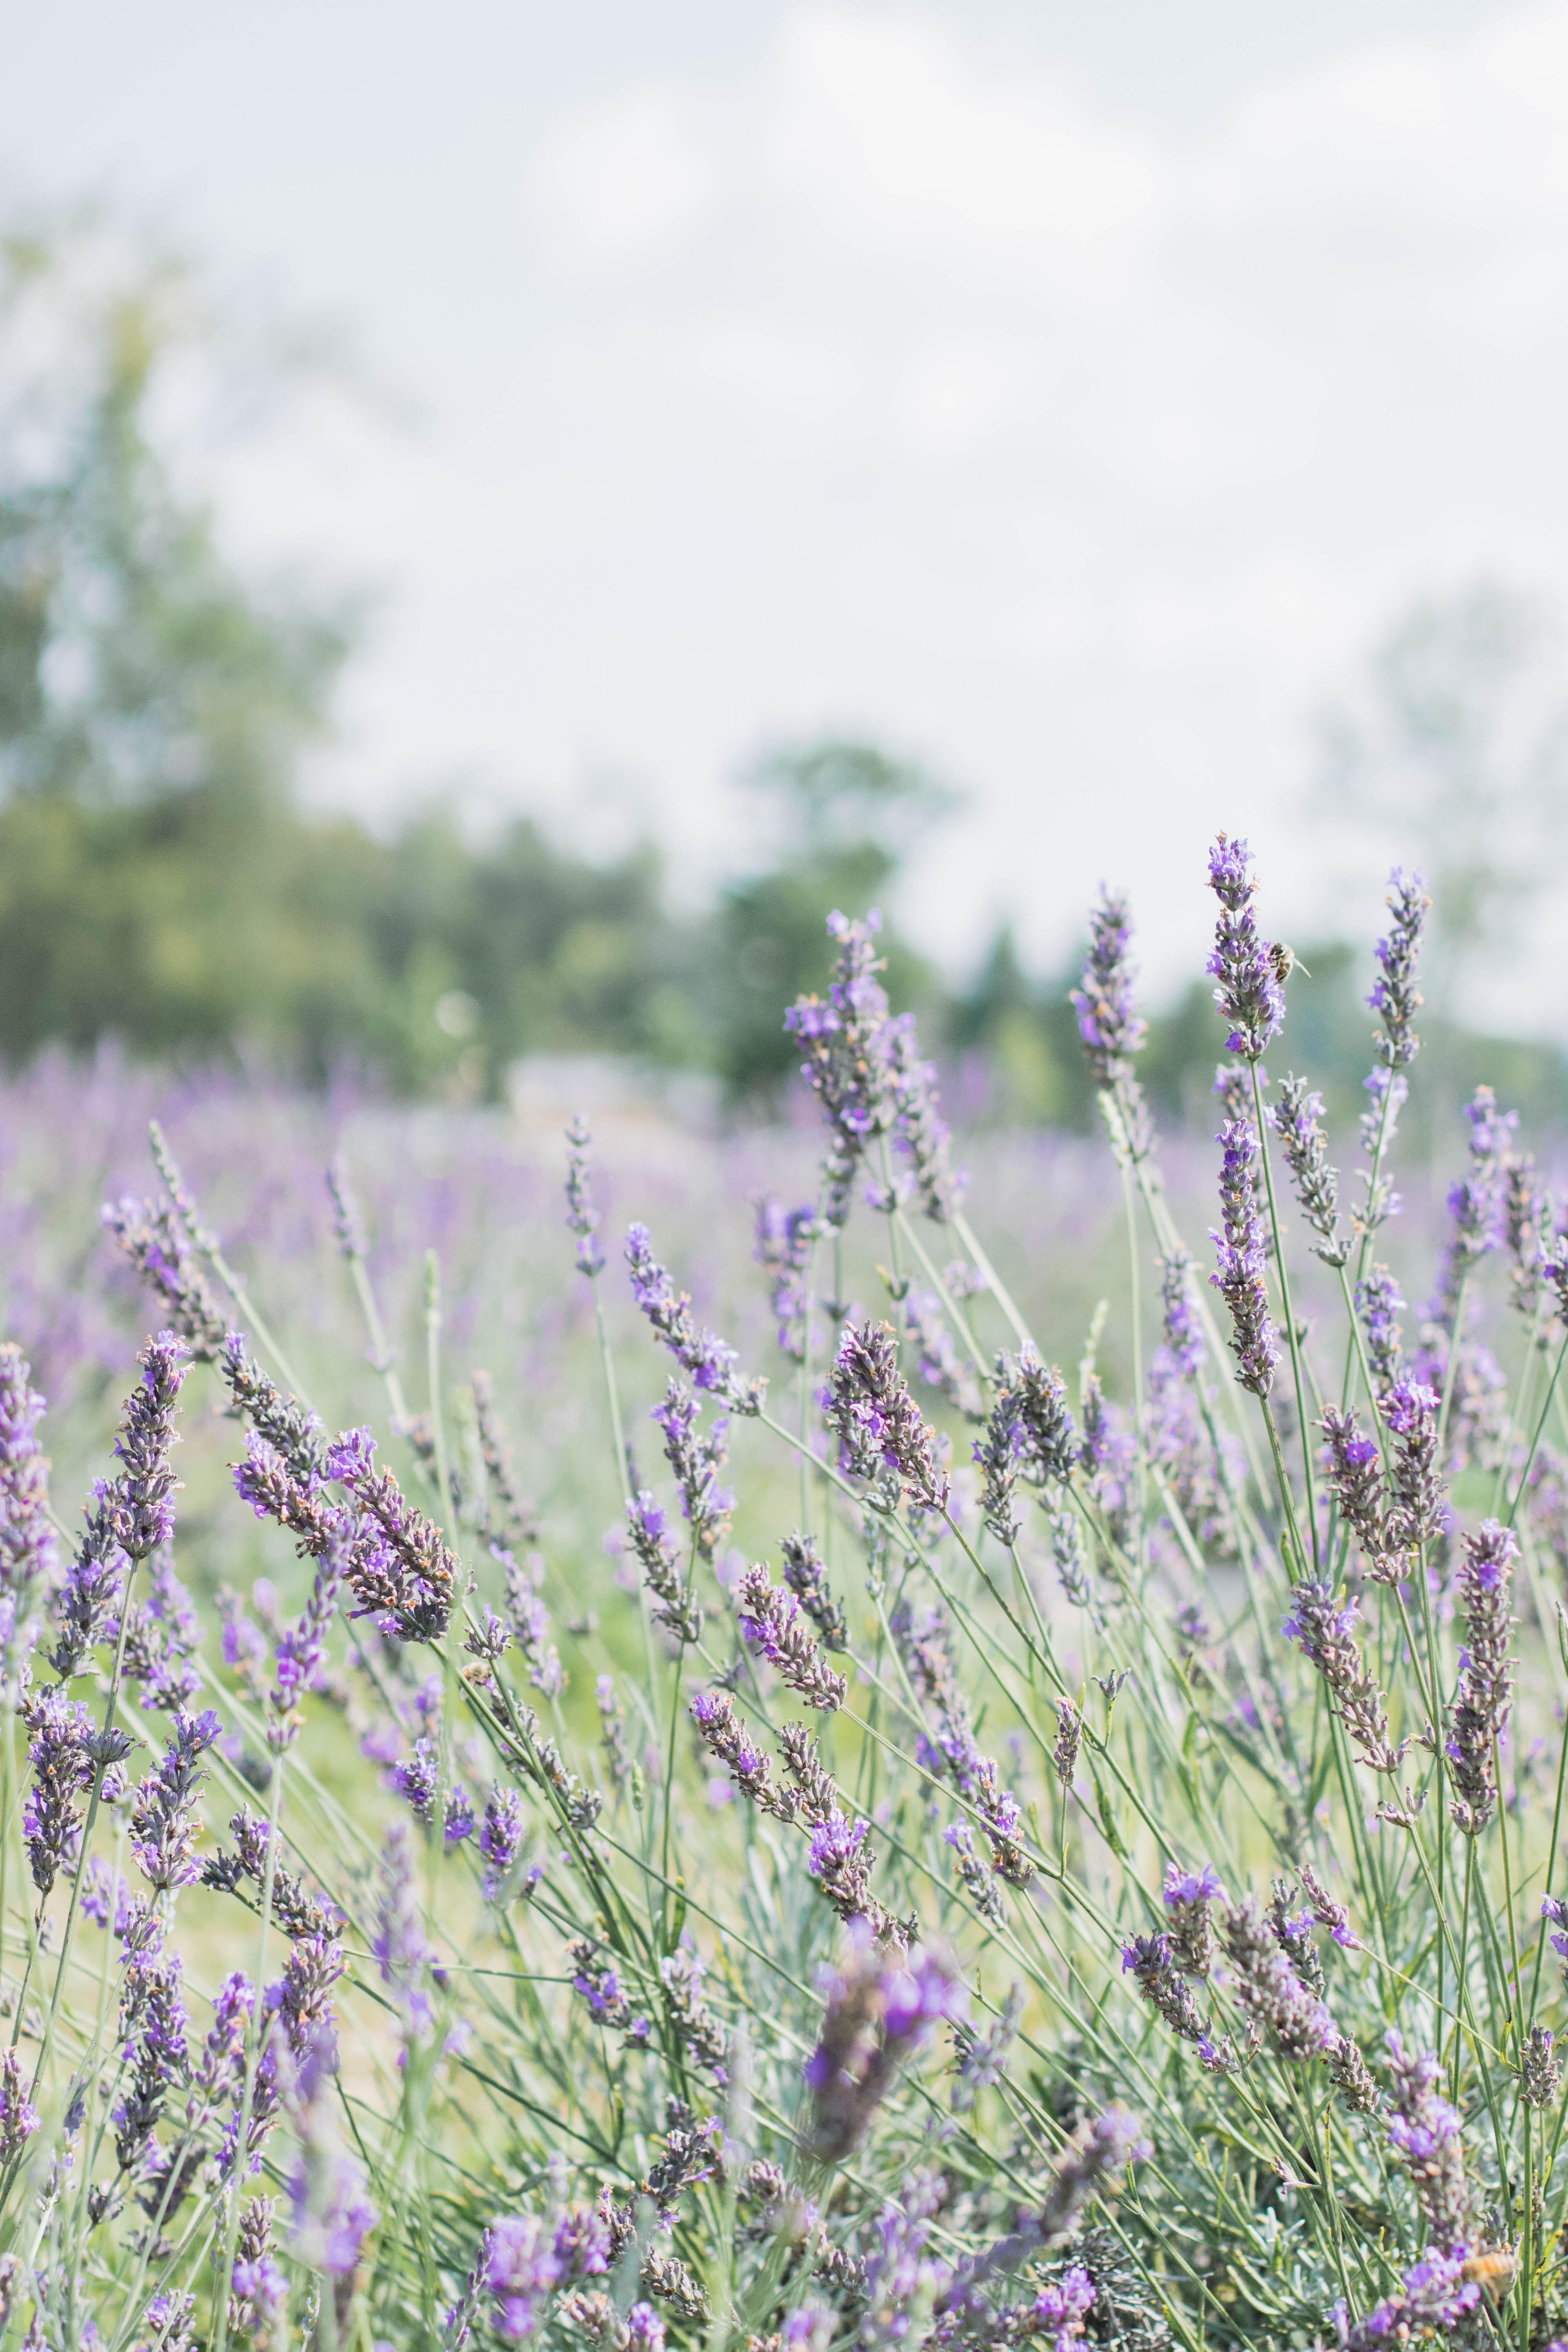 Terre Bleu Lavender Farm in Milton is the Perfect Day Trip from